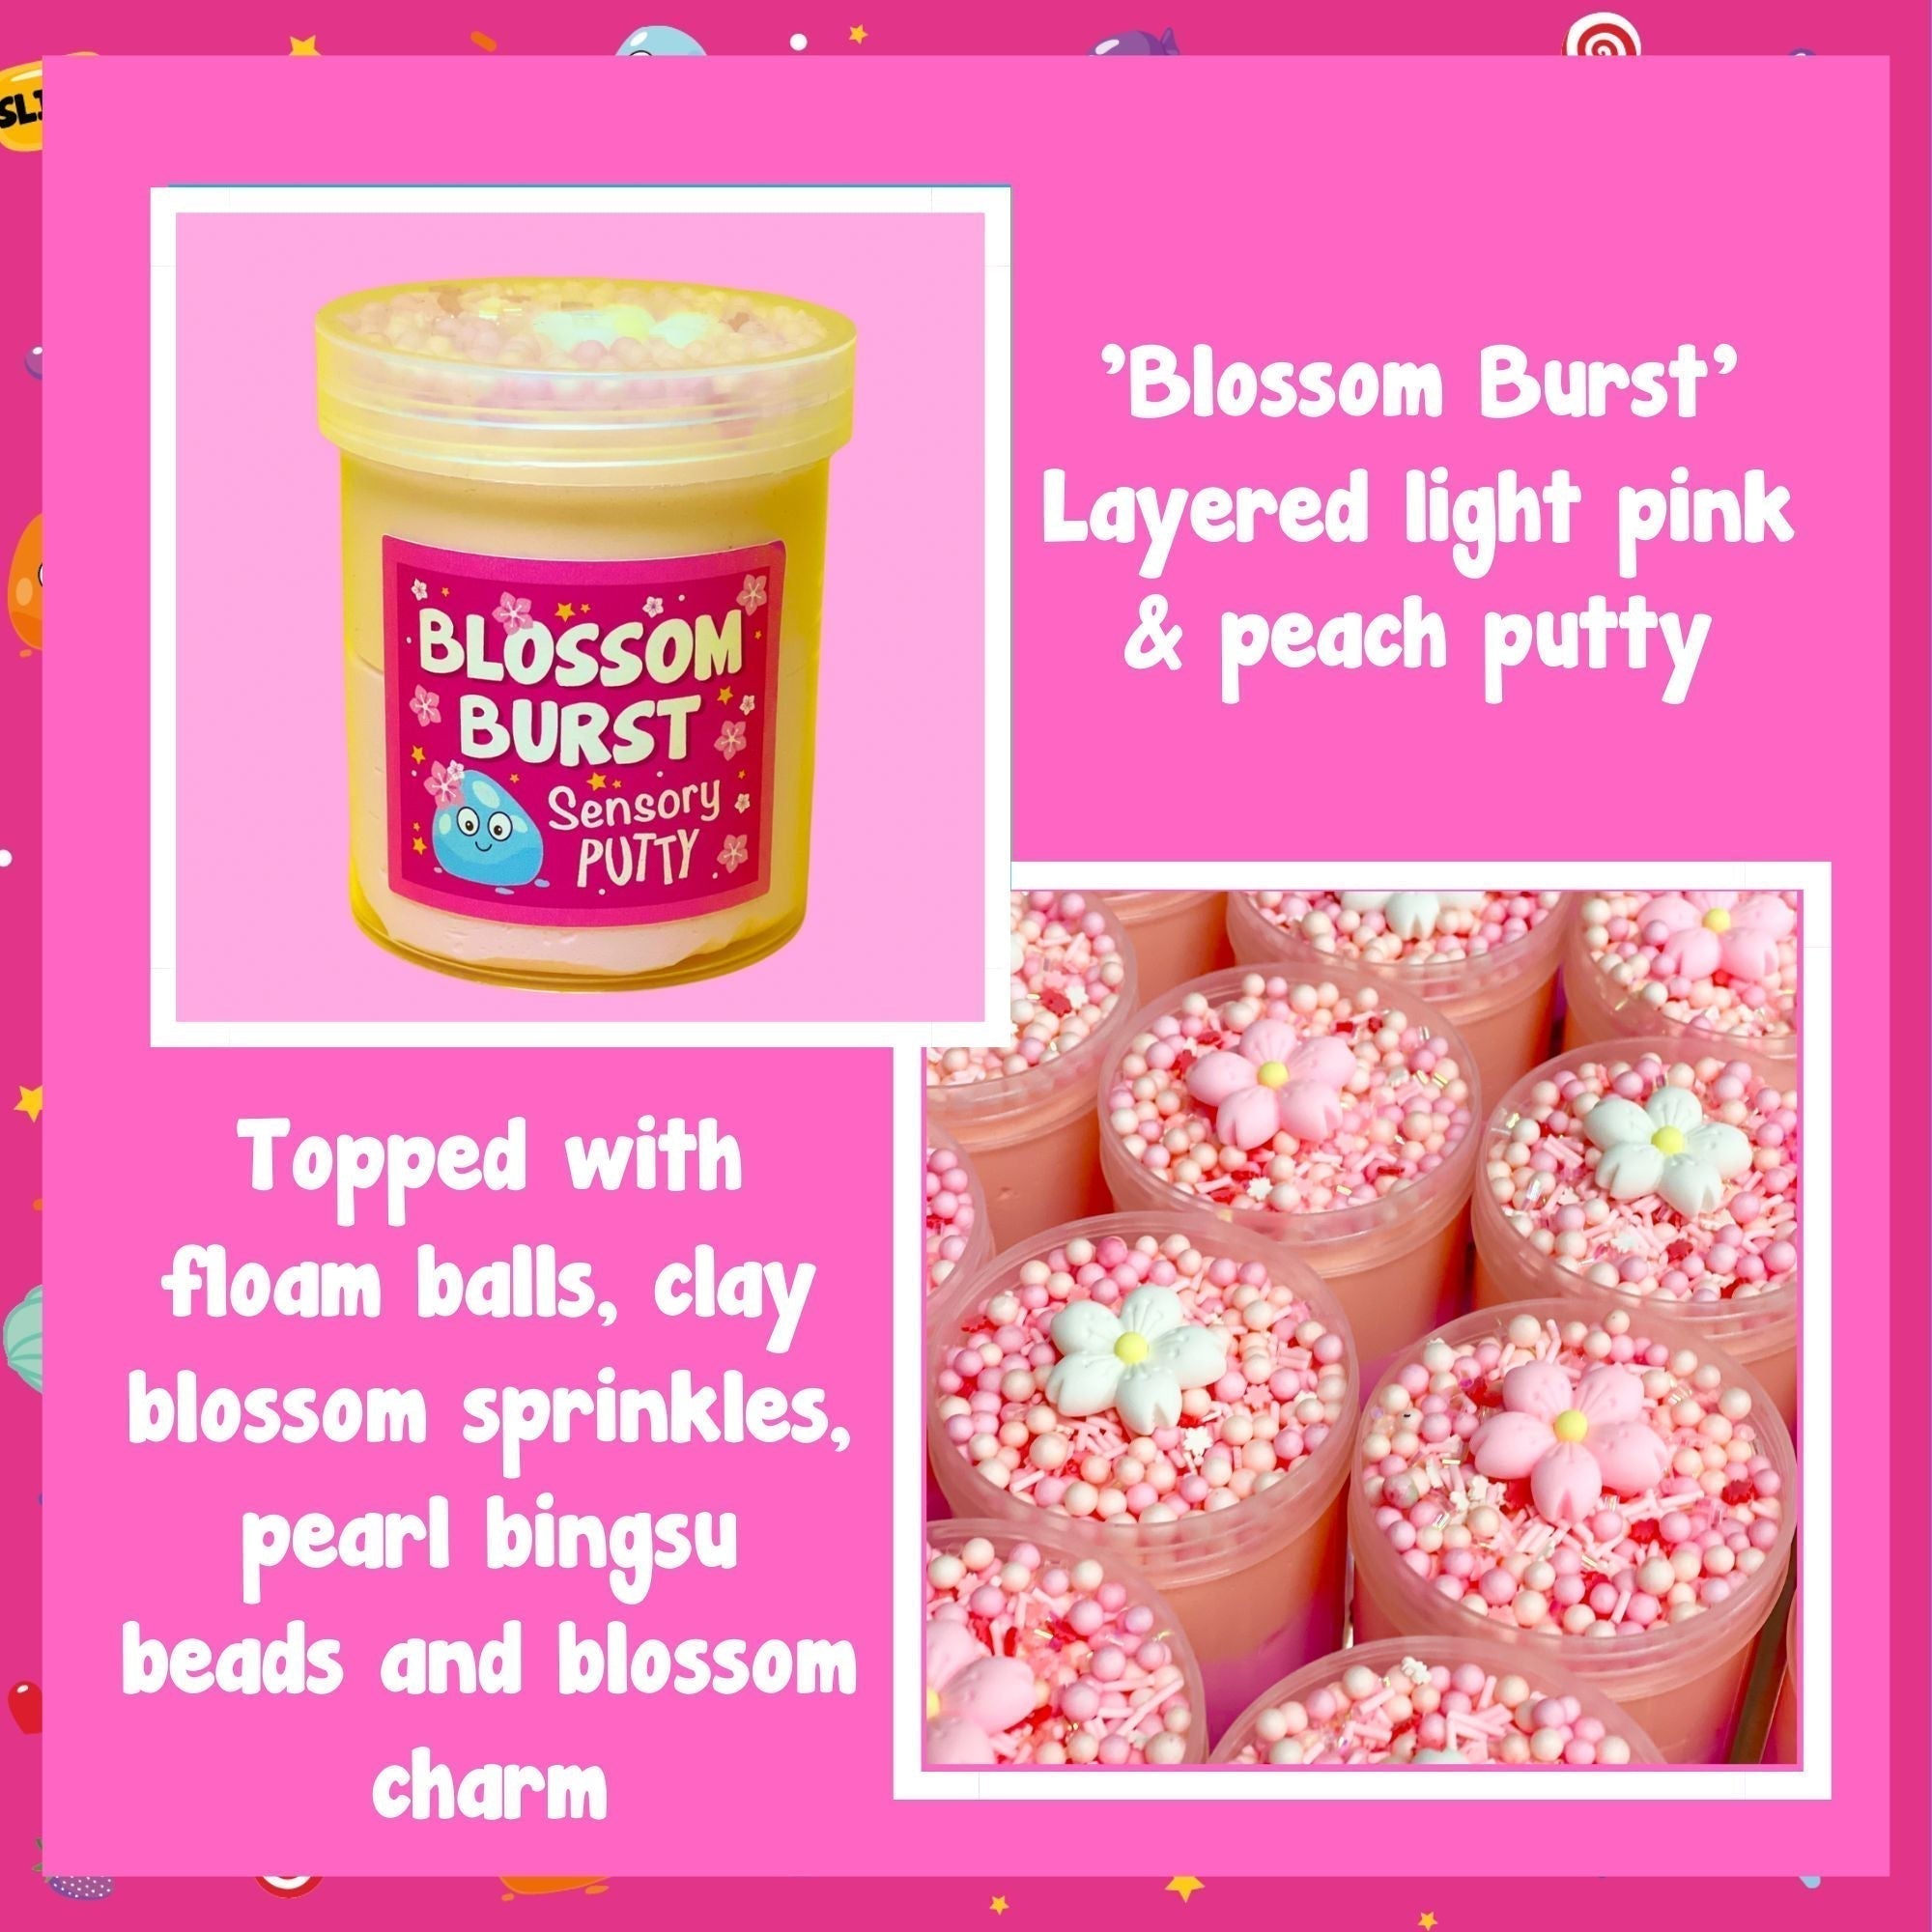 Blossom Burst Putty, Our Blossom Burst putty consists of a stunning combination of floral goodness. The duo of pastel pink and peach coloured putty is topped with matching pink and peach floam beads, shimmering pearl bingsu beads, beautiful blossom sprinkles and an adorable blossom charm, accompanied by a gentle cherry scent too! Putties are air reactive and will dry out of left out. Always return to the container after play with the lid tightly on. Keep away from direct sunlight. Keep away from fabrics and